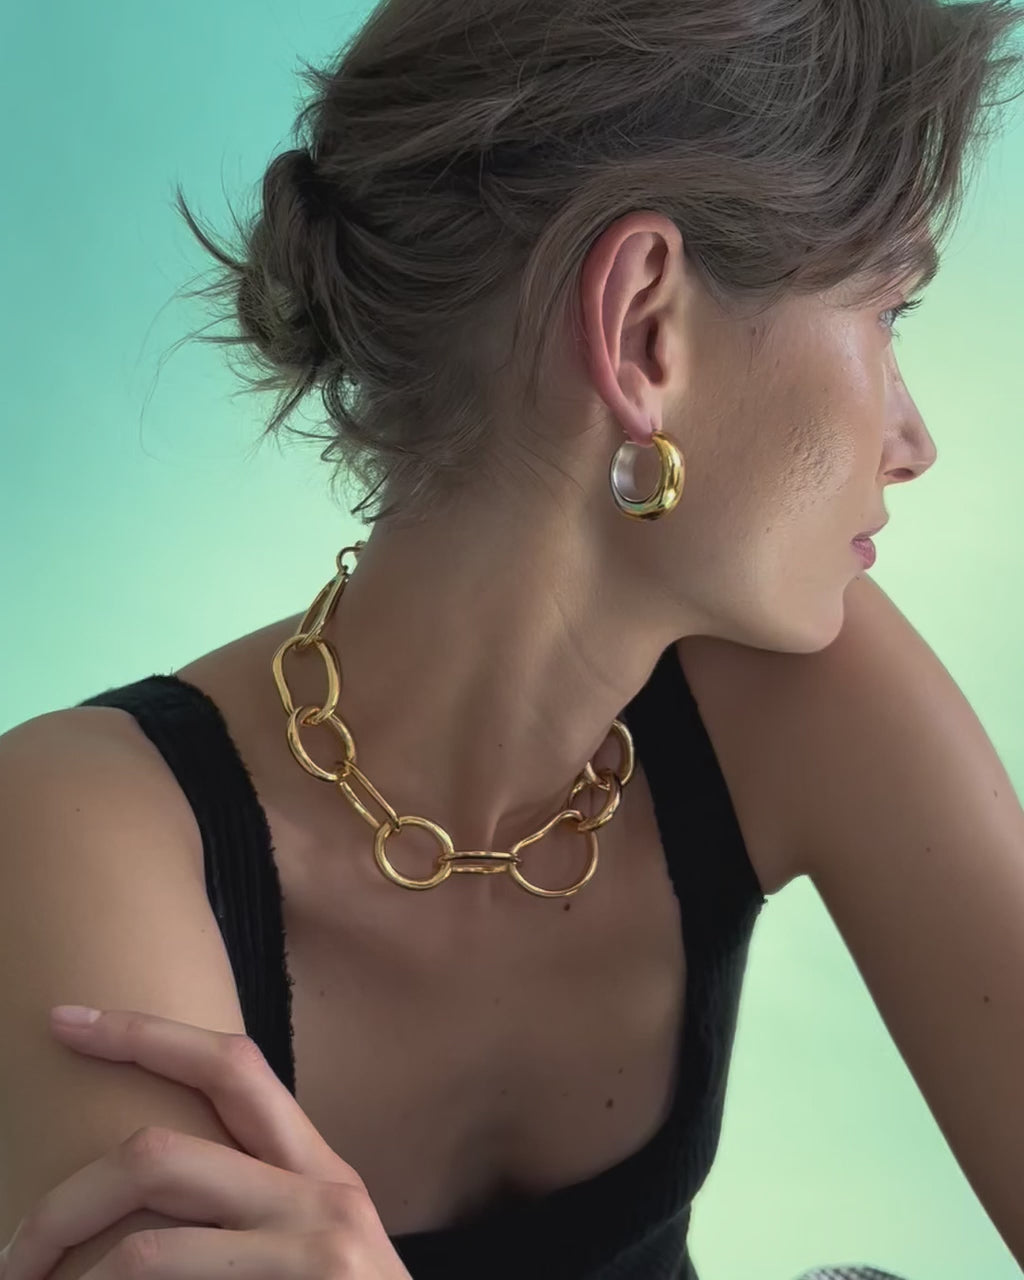 Video of model on blue backdrop, arms crossed and wearing black tank with Bubble Hoop Earrings and Porto Chain.